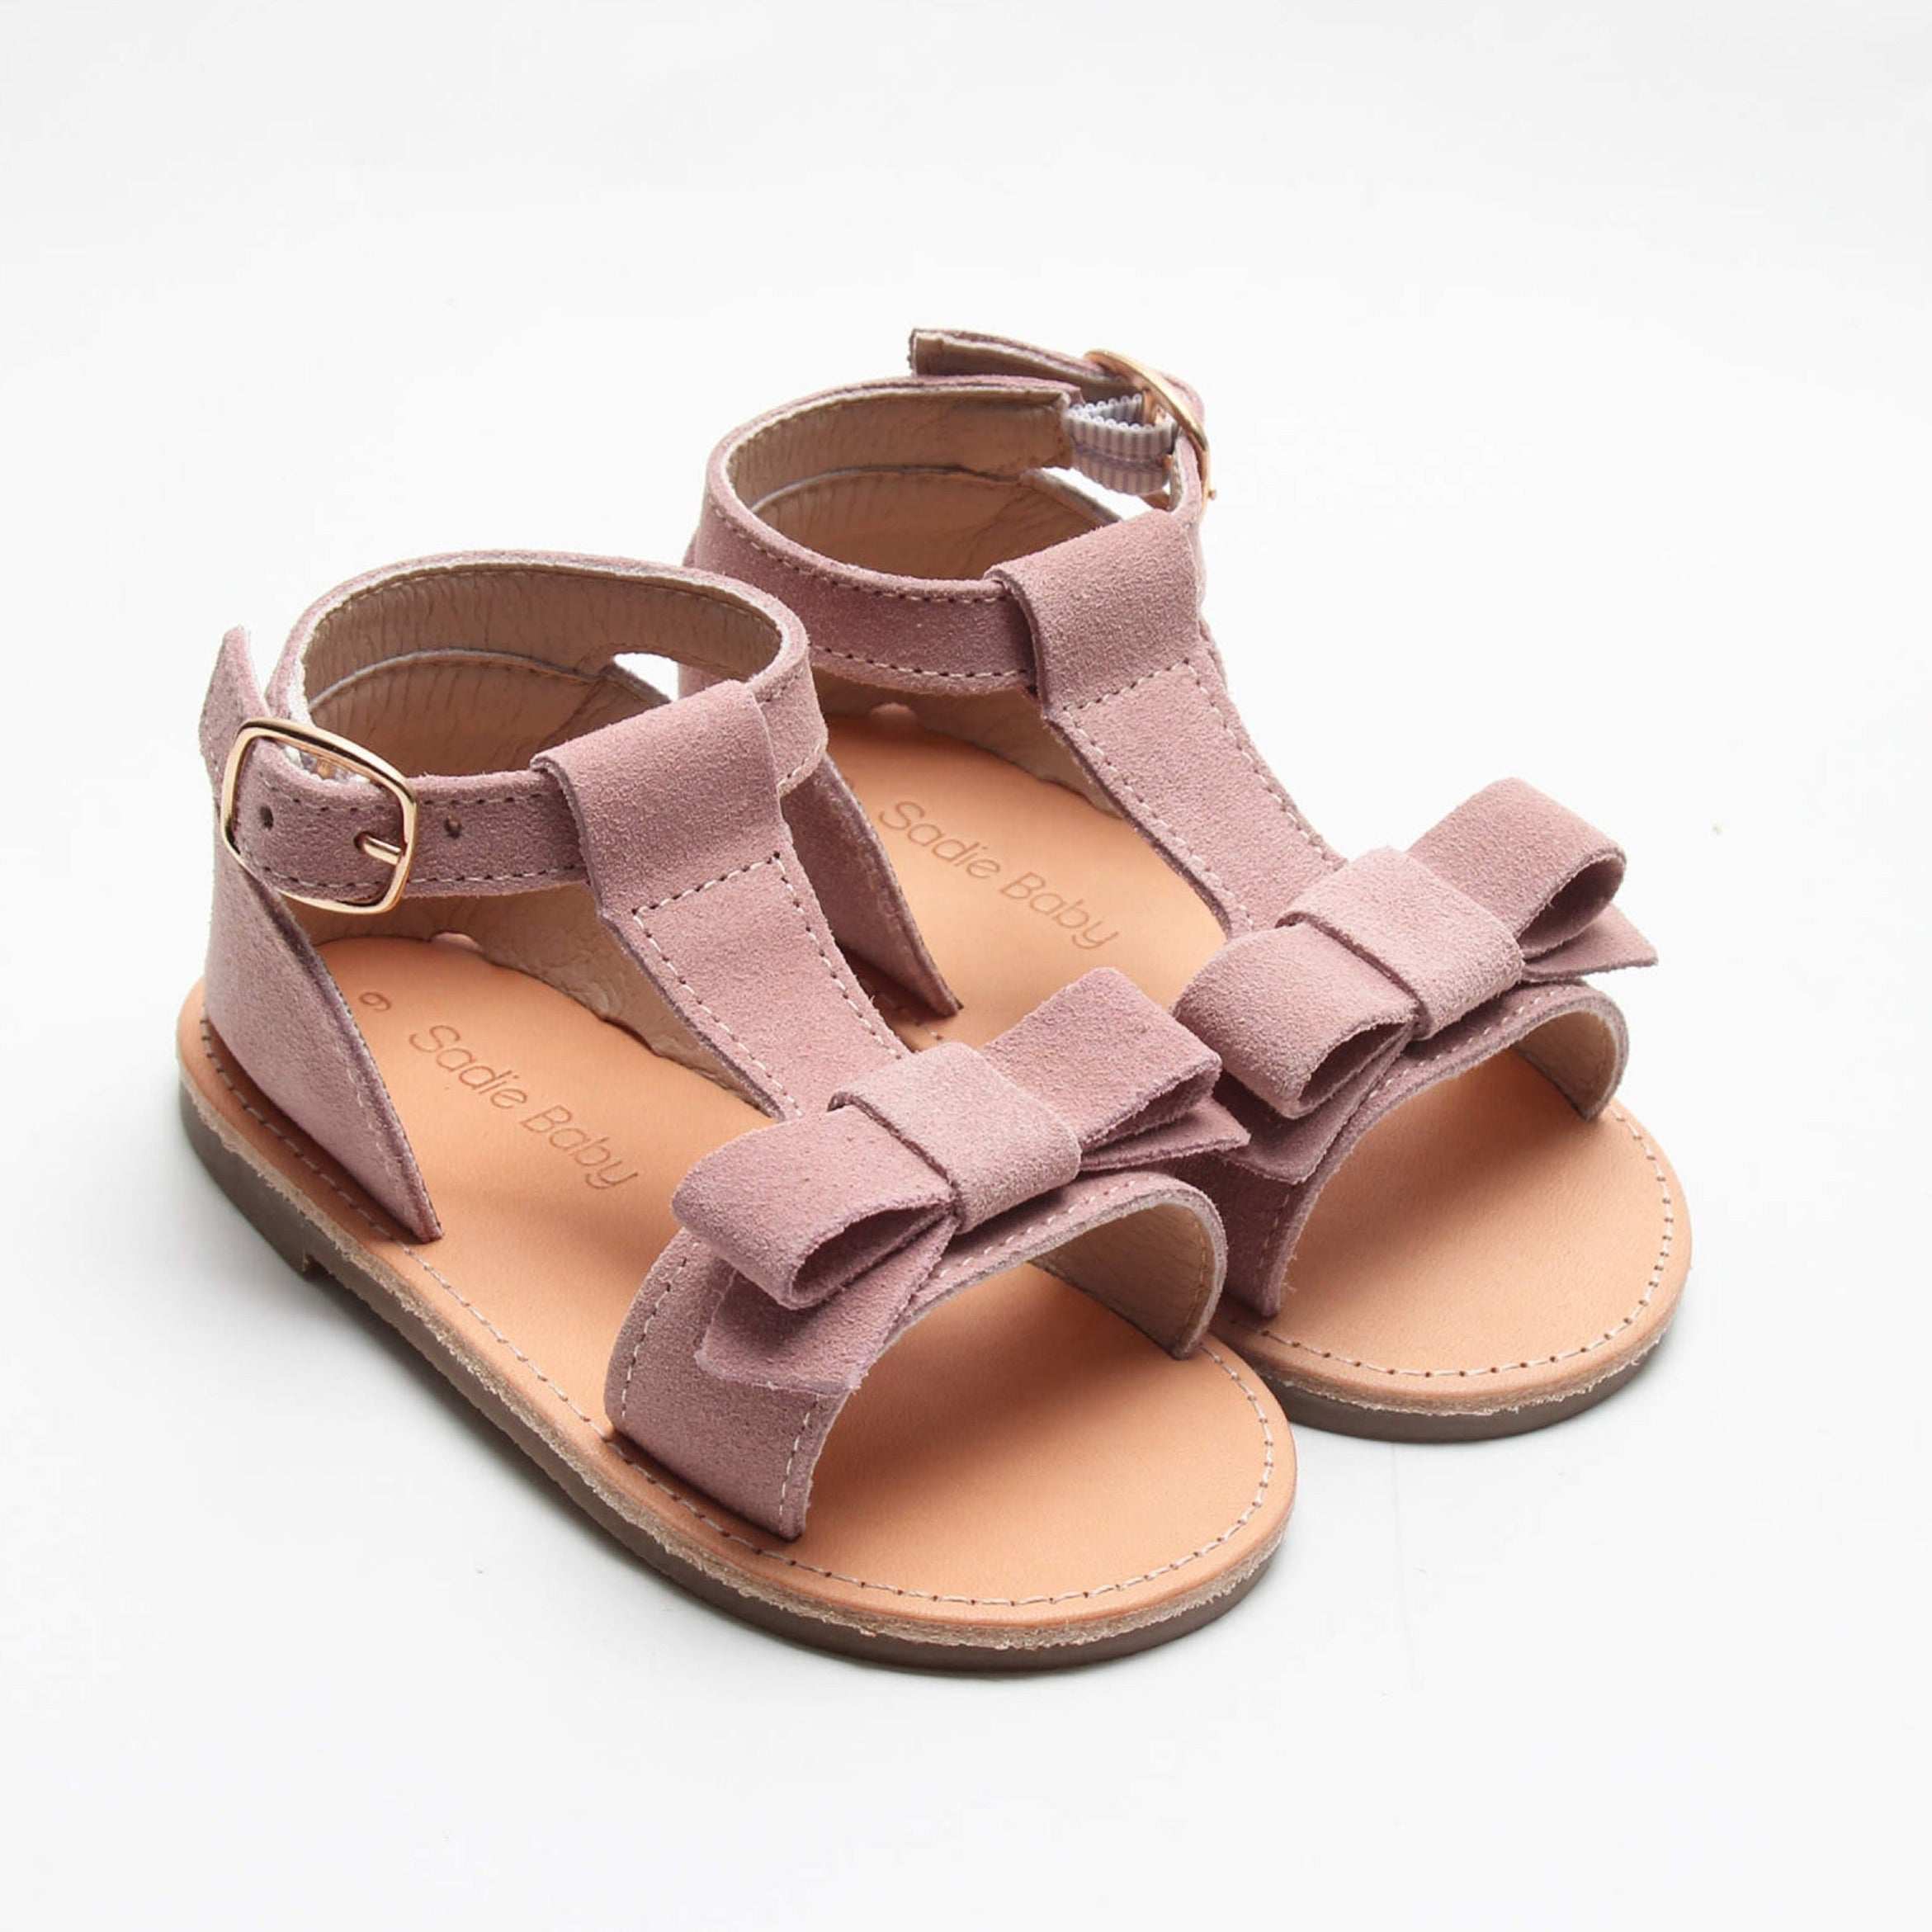 New Arrival Rubber Sole Baby Sandals Summer-JZ Baby